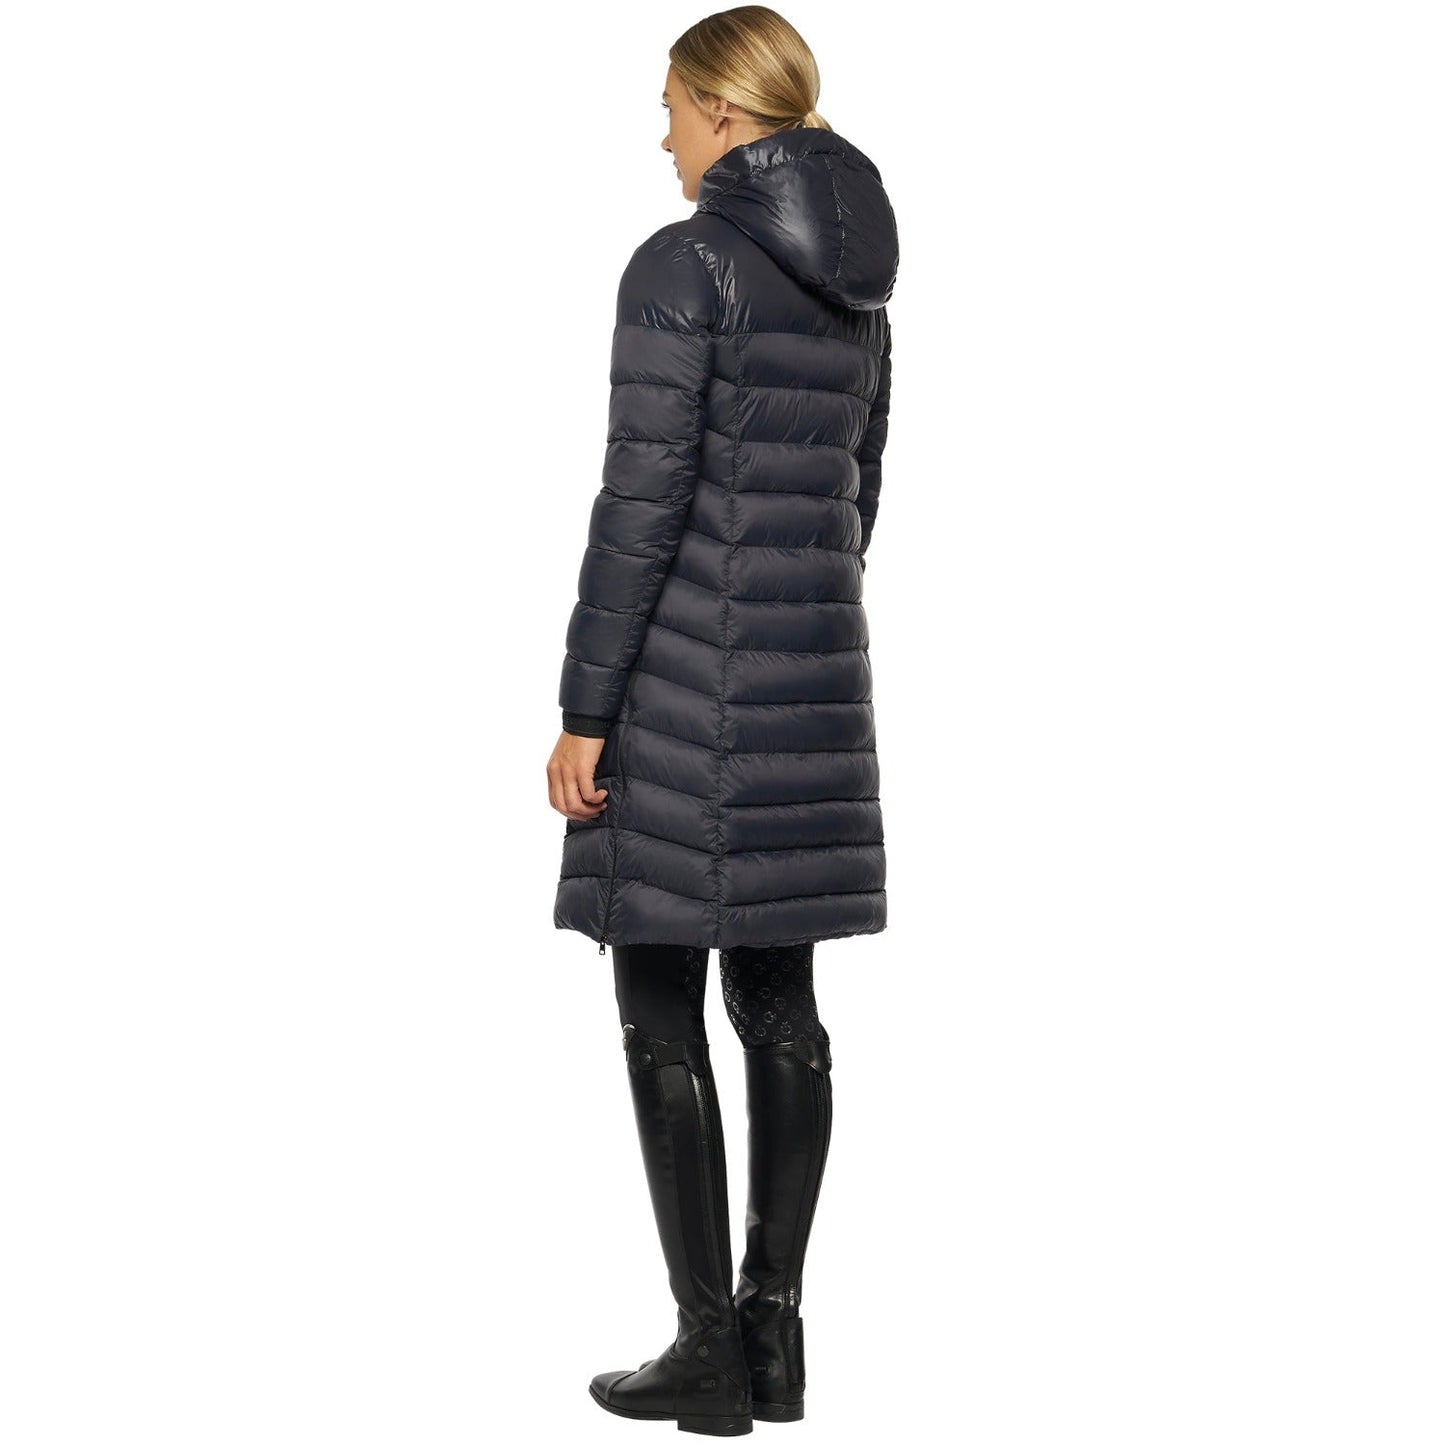 Cavalleria Toscana Long Hooded Puffer Jacket-Trailrace Equestrian Outfitters-The Equestrian